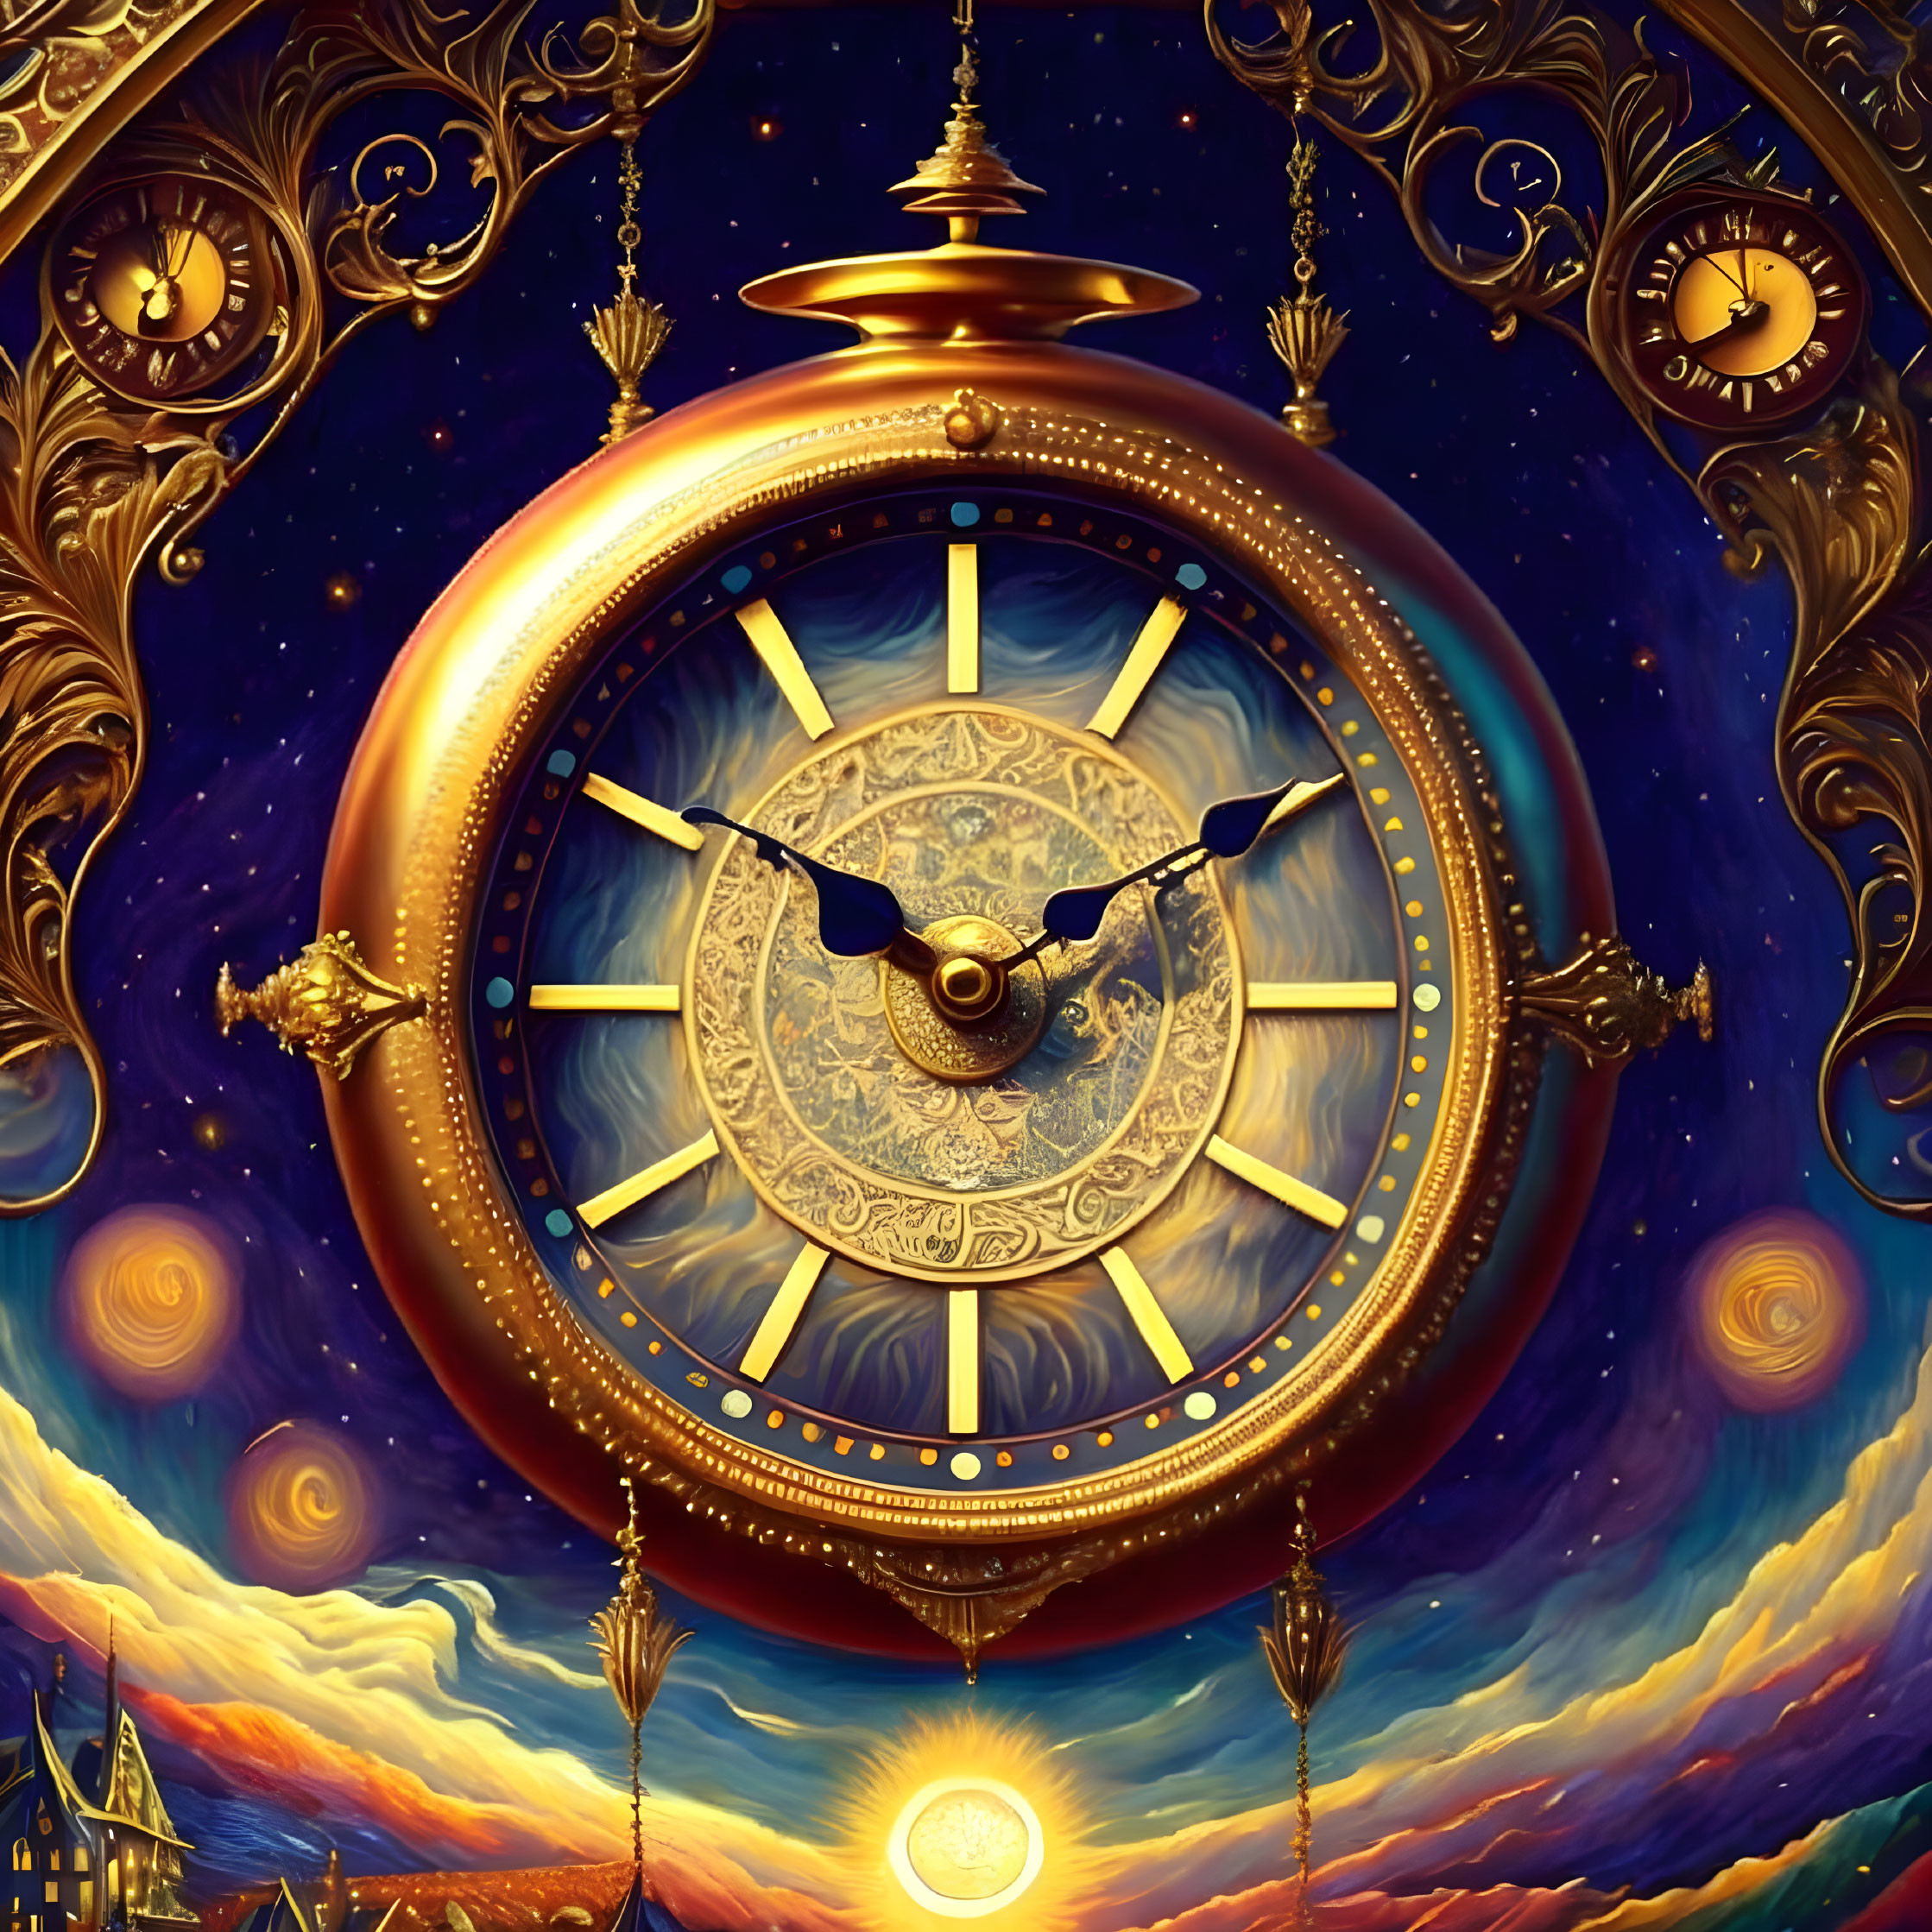 Ornate surreal clock with celestial motifs and cosmic landscape elements